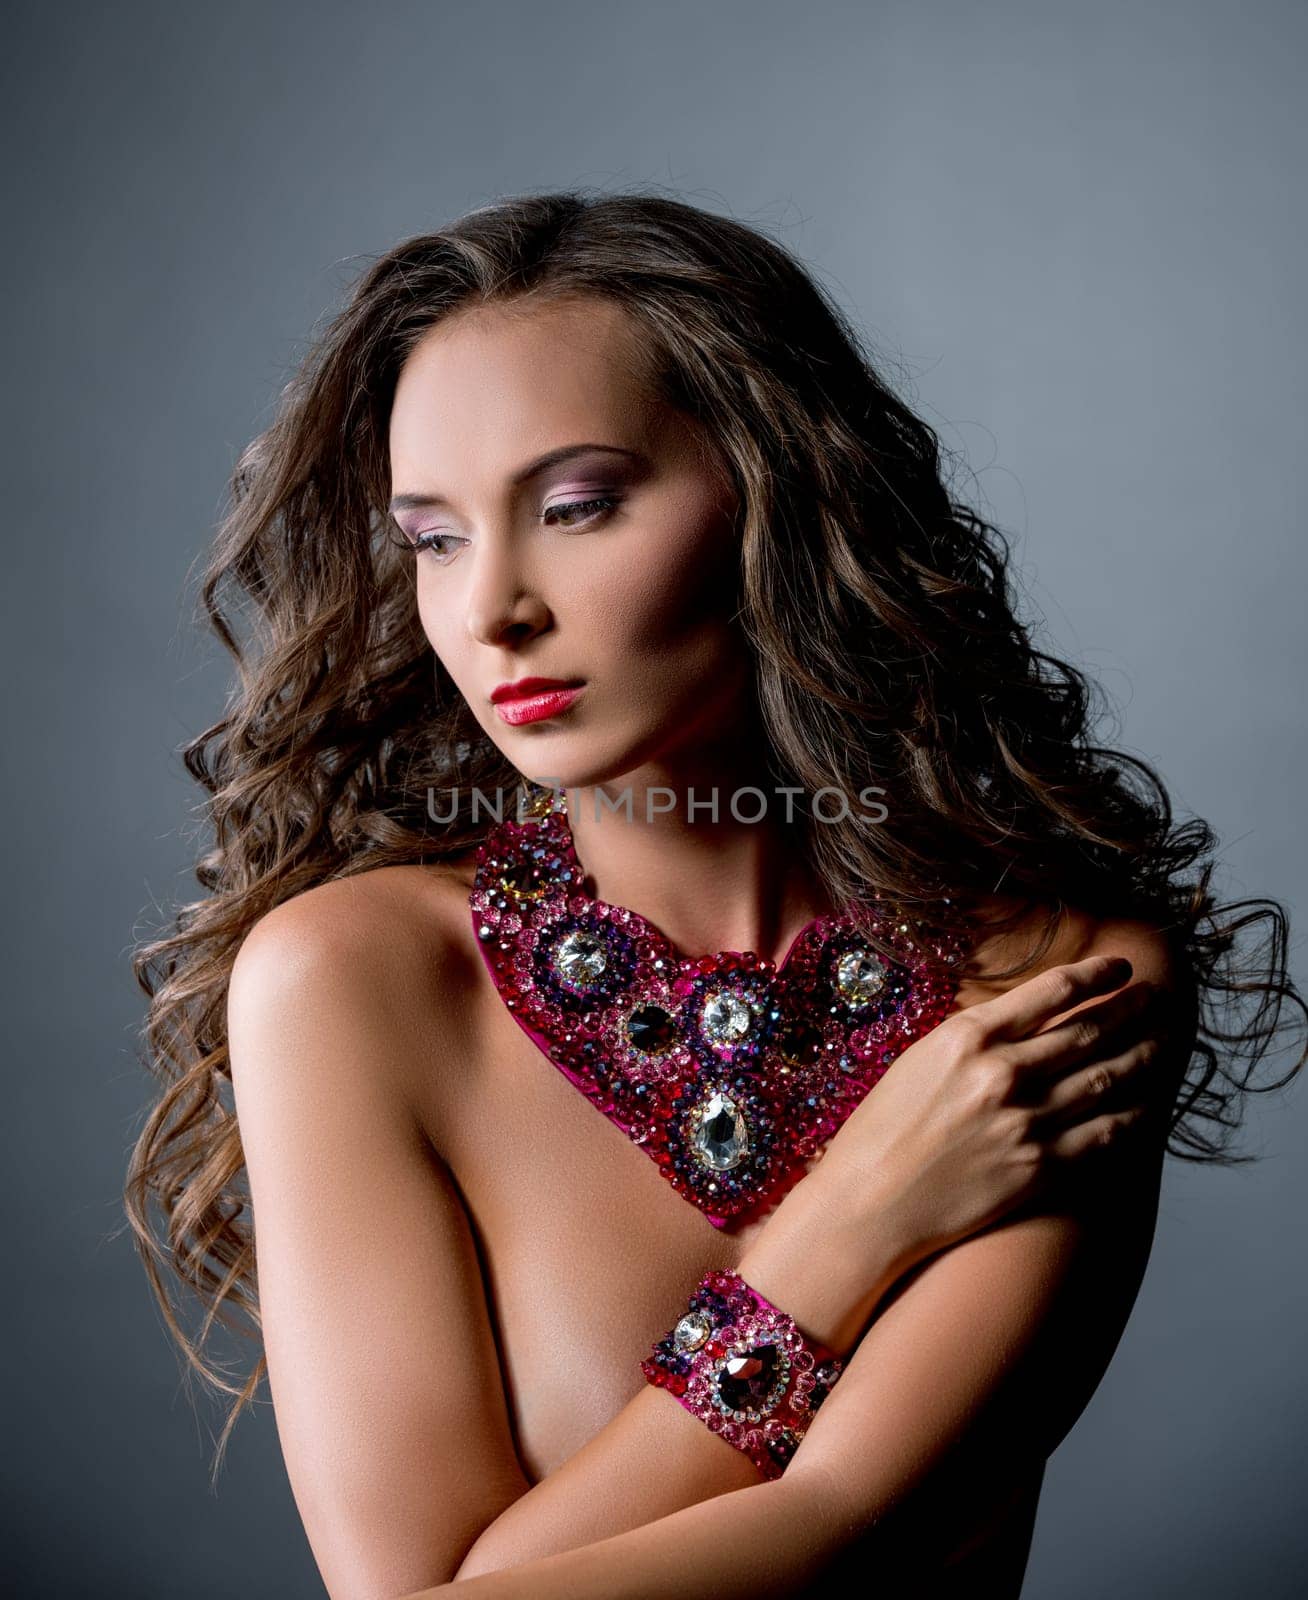 Beautiful nude woman in luxurious necklace and bracelet